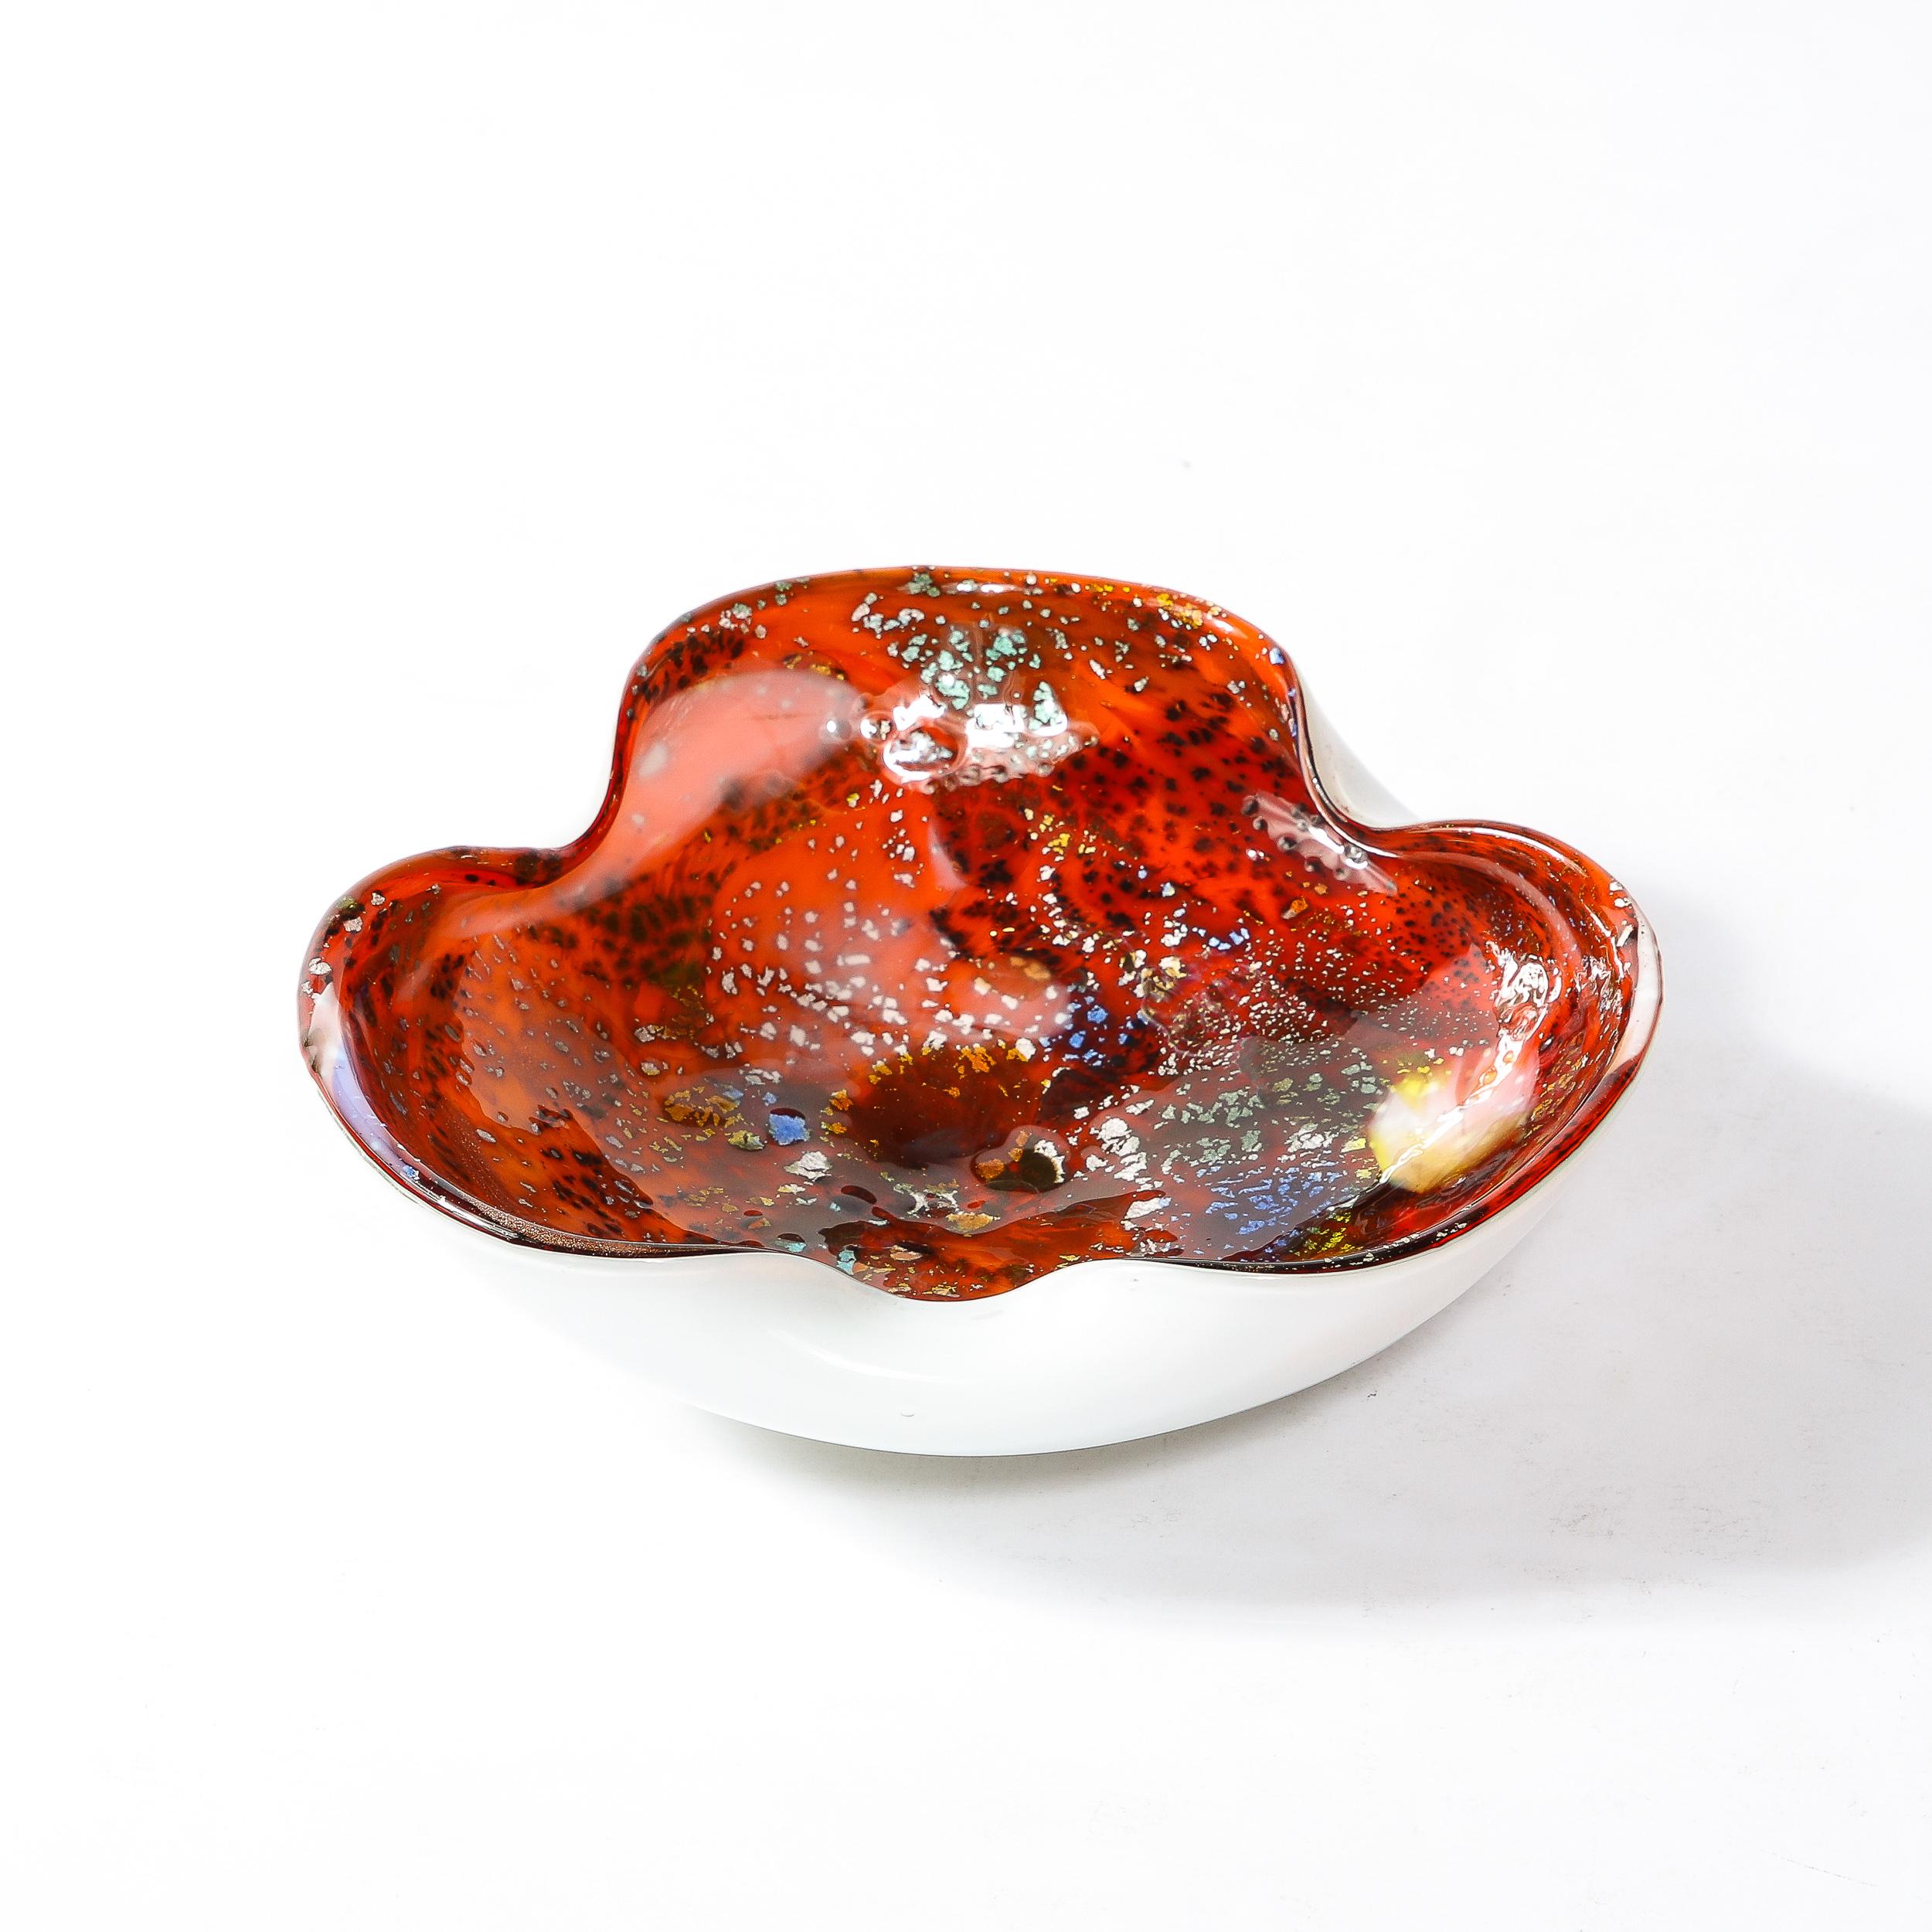 -This eye catching Mid-Century Modernist Dish originates from Italy, Circa 1960. Featuring a circular form with three indentations revealing the undersurface in a lovely cool white, the interior contrasts starkly in a bright red with speckled glass